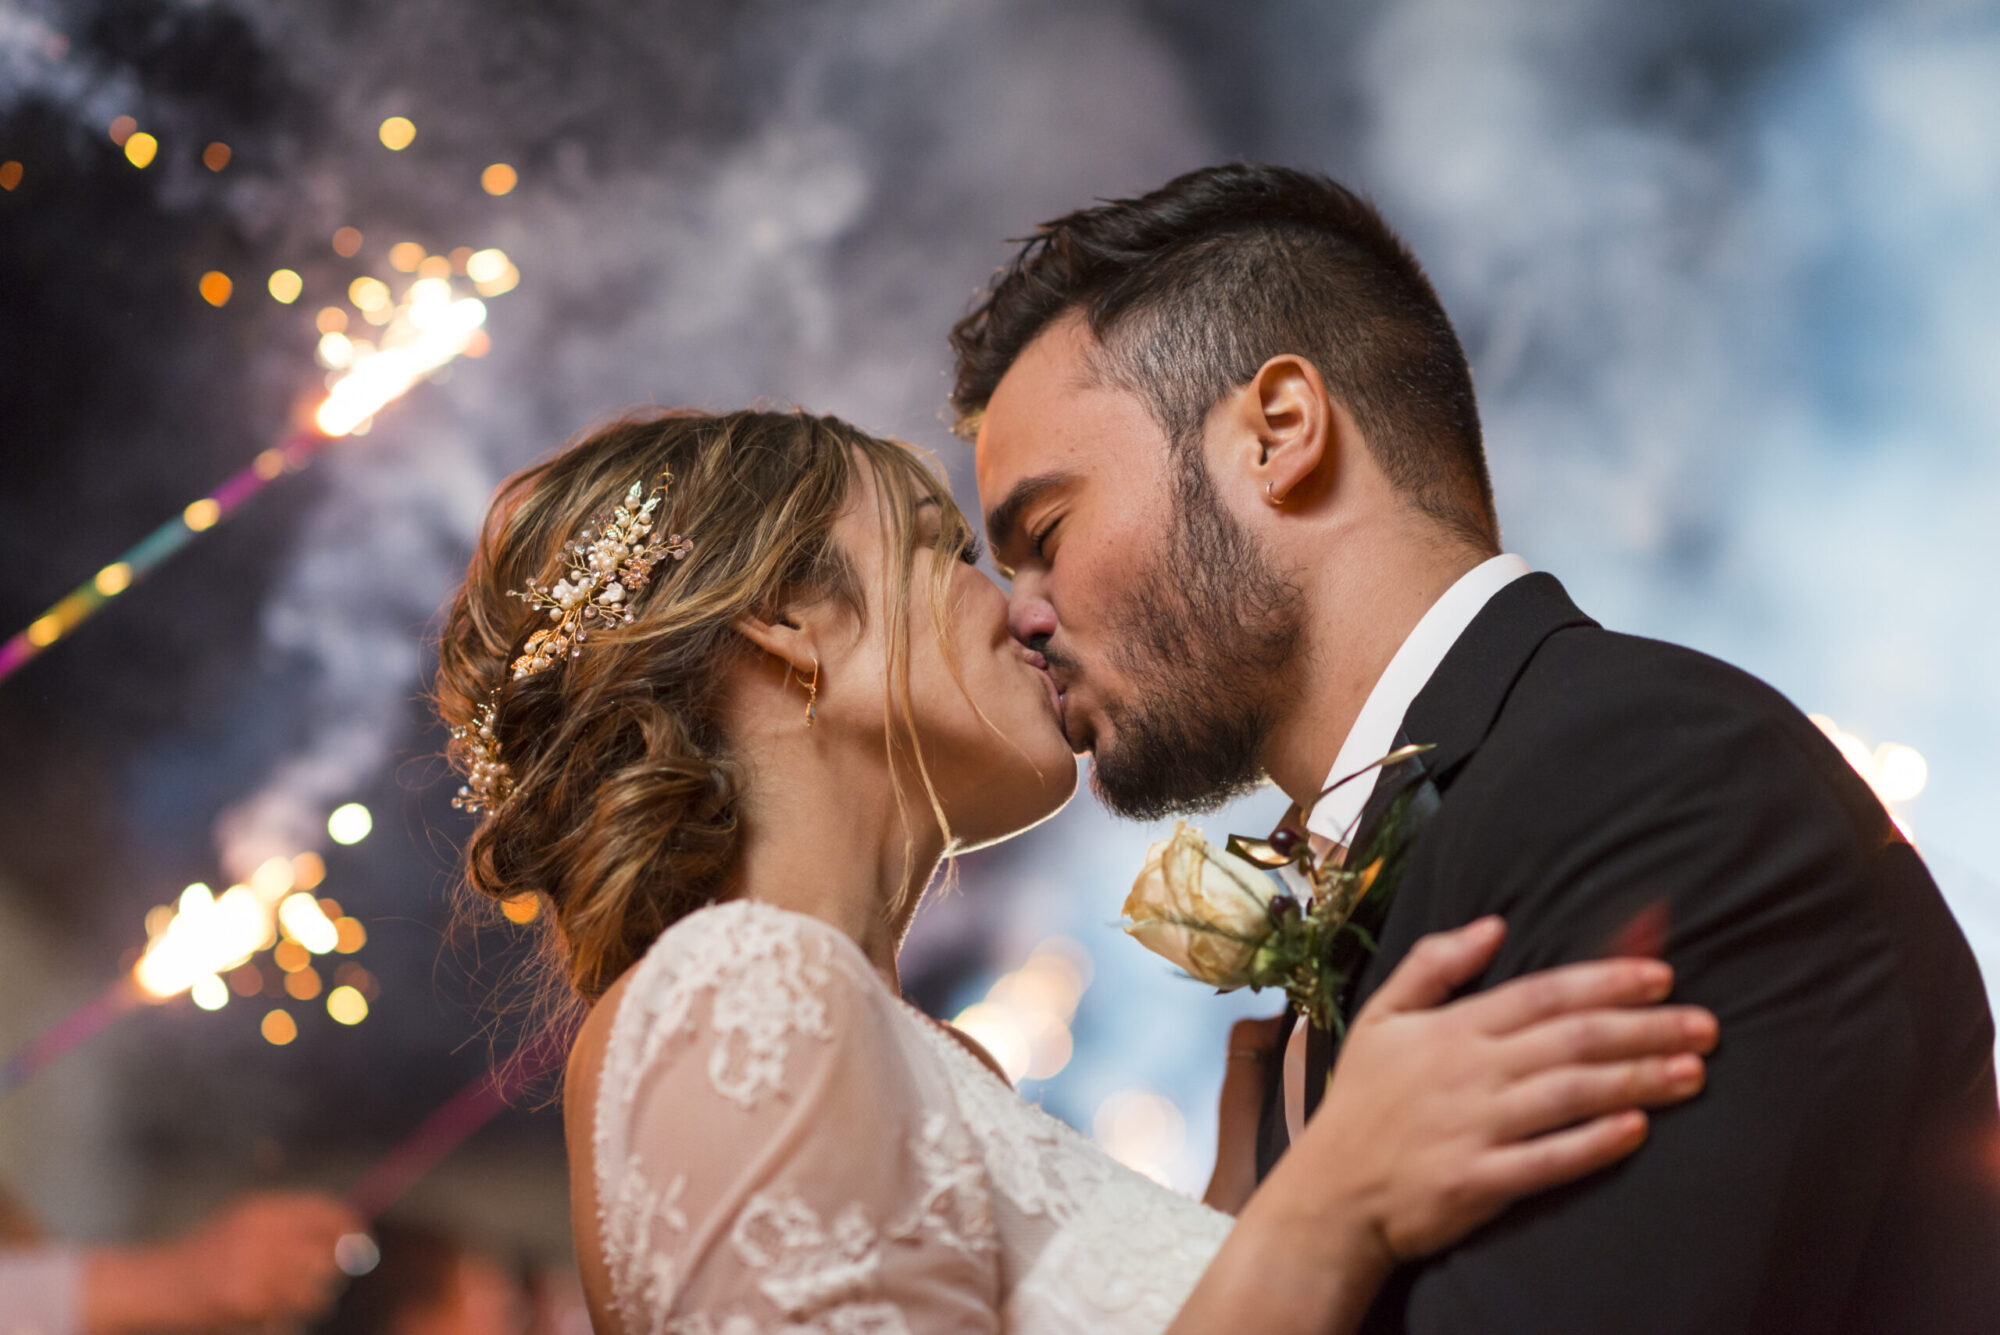 A beautiful bride kissing her groom at night with sparklers during their grand wedding exit. Family and wedding photography in Pittsburgh.